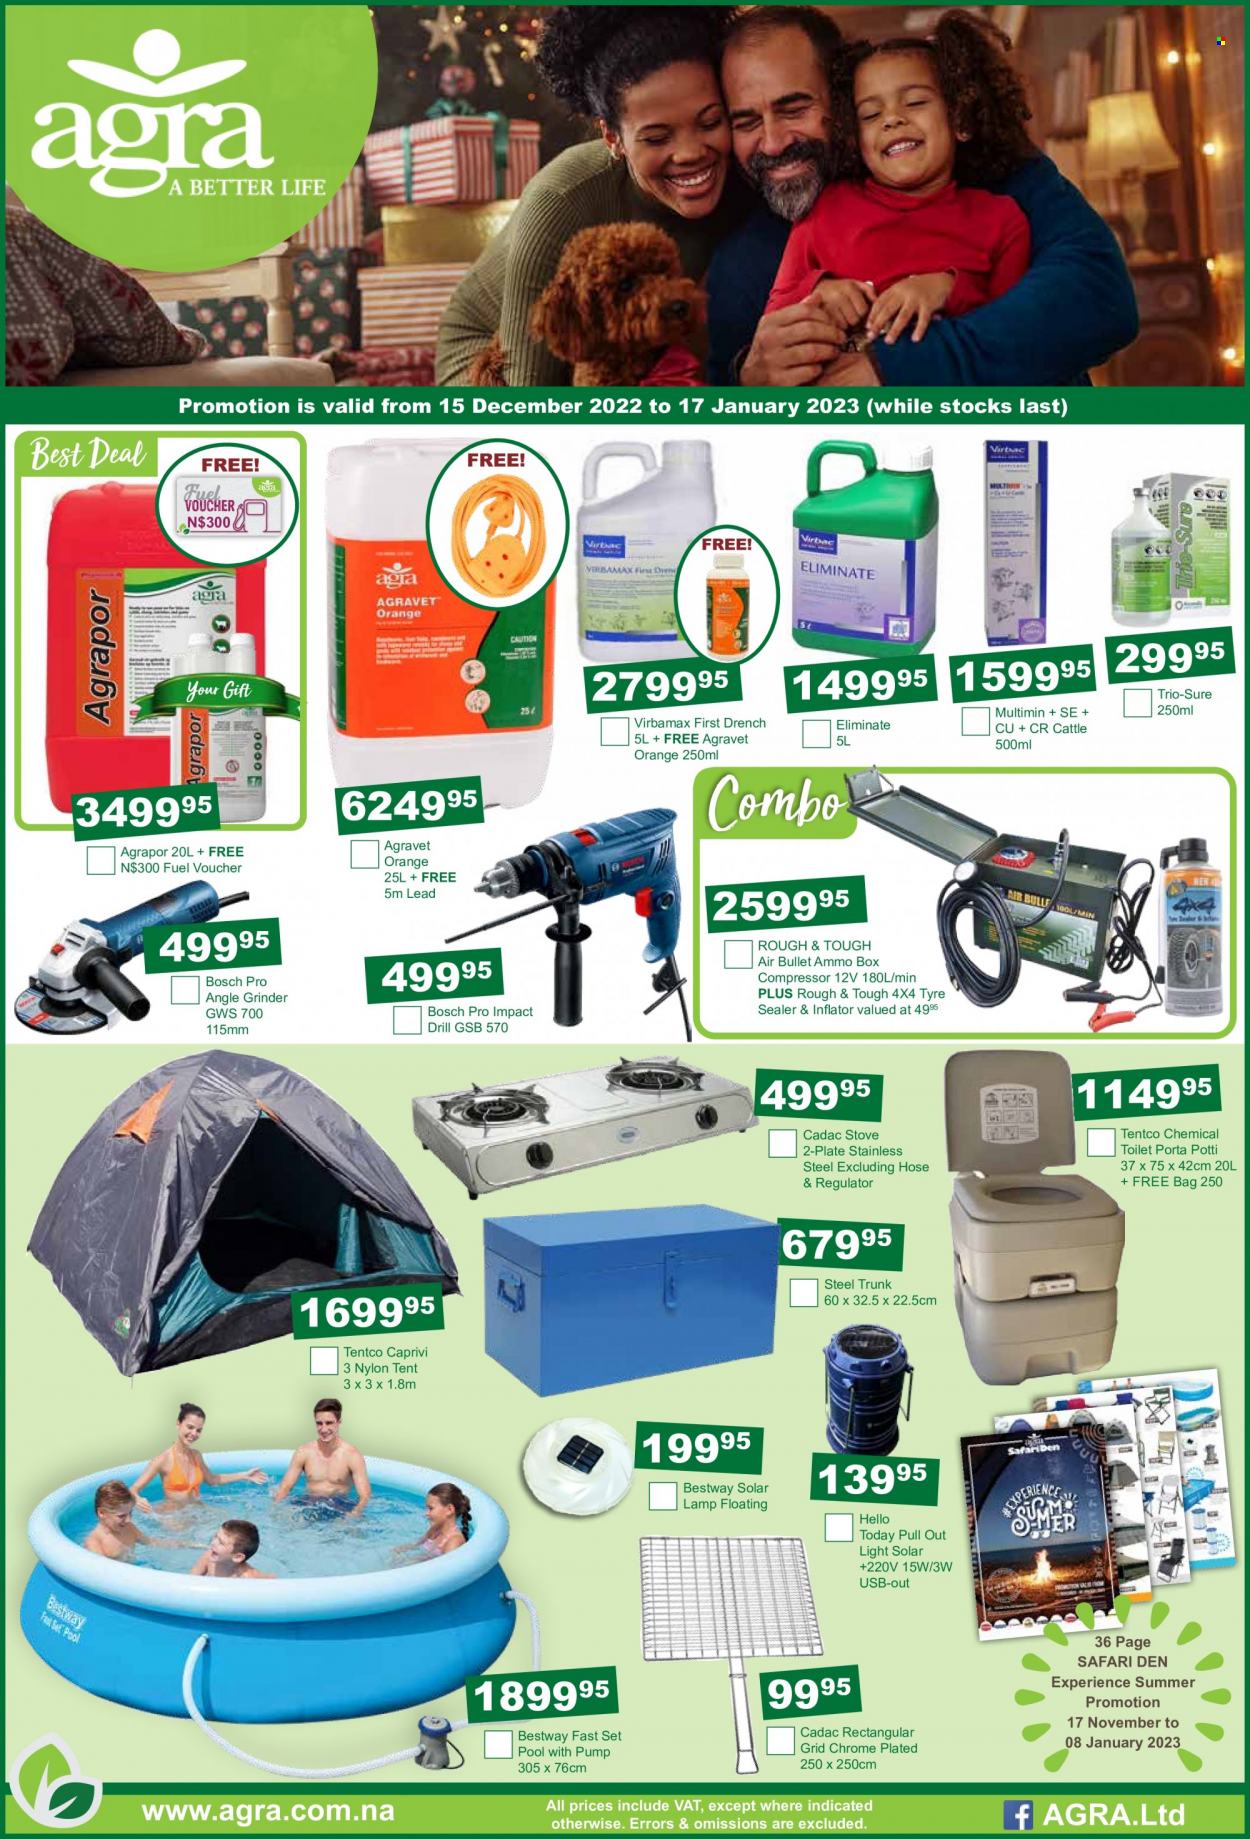 thumbnail - Agra catalogue  - 15/12/2022 - 17/01/2023 - Sales products - toilet, inflator, Bosch, lamp, stove, drill, grinder, angle grinder, air compressor, pump, tent, ammo can, ammo. Page 1.